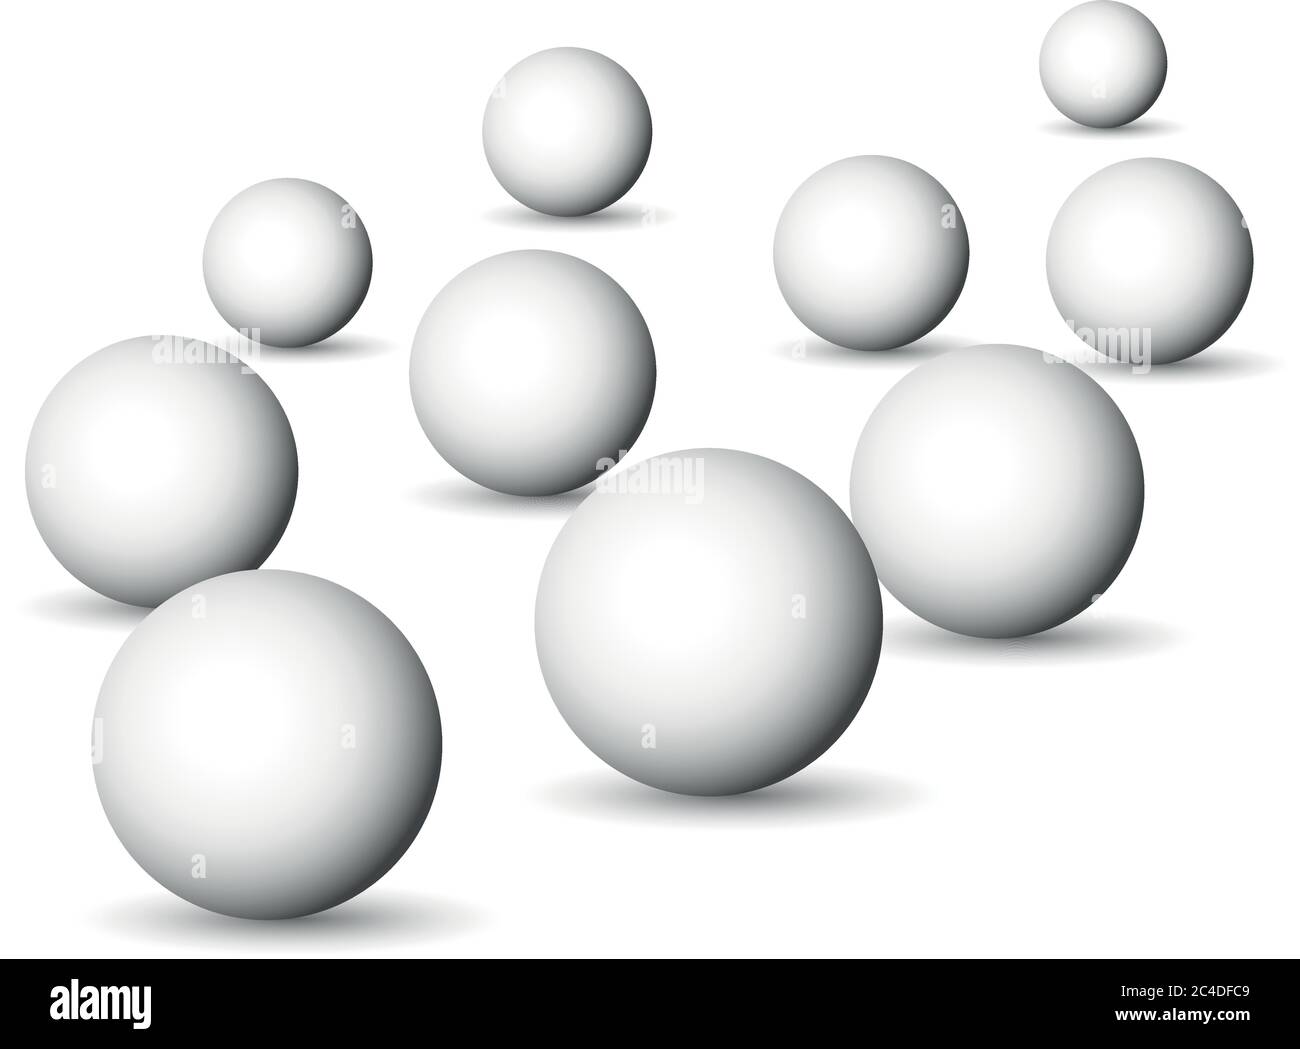 Group of white spheres, balls or orbs. 3D vector objects with dropped shadow on white background. Stock Vector